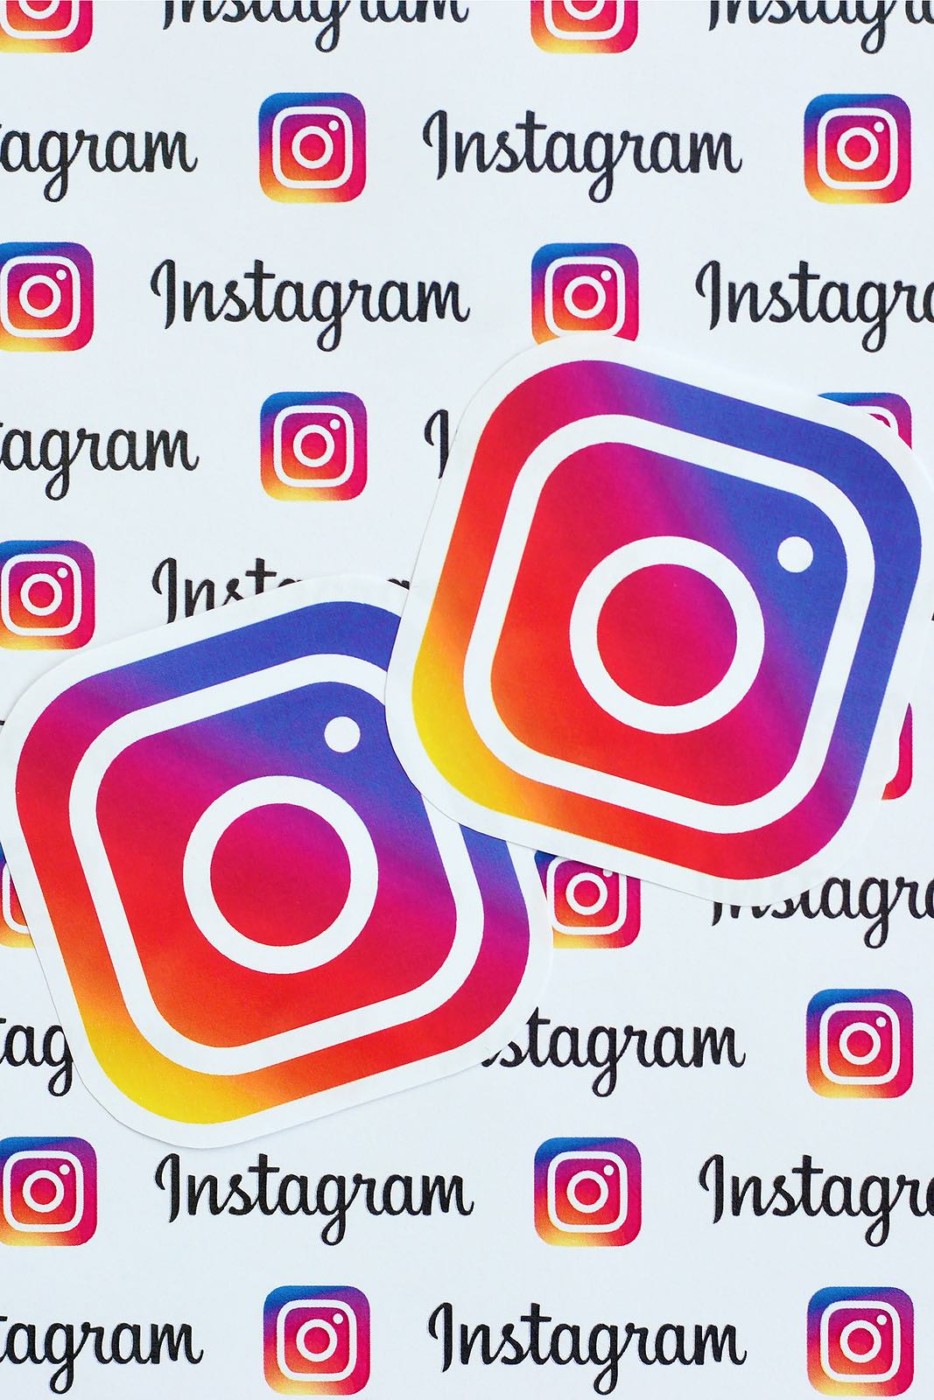 instagram marketing tips for small businesses